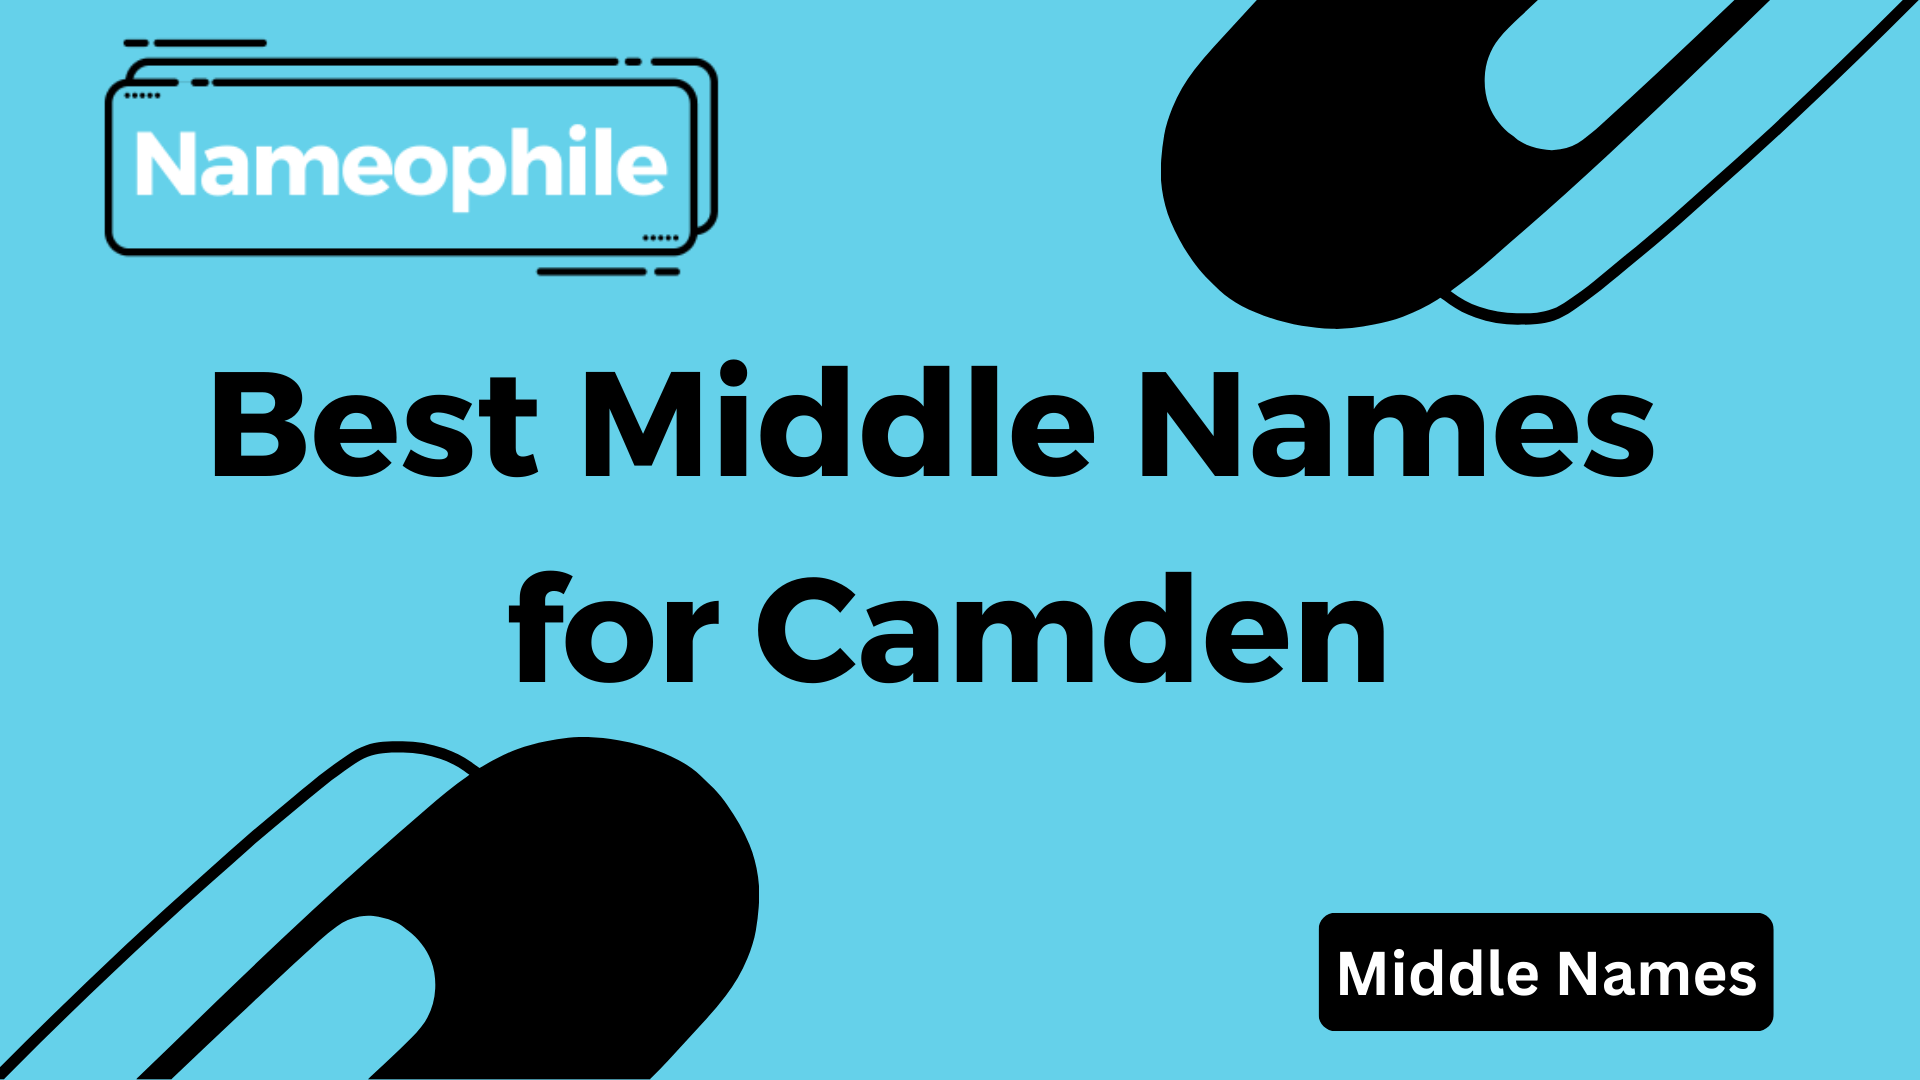 Best Middle Names for Camden (2) (1)